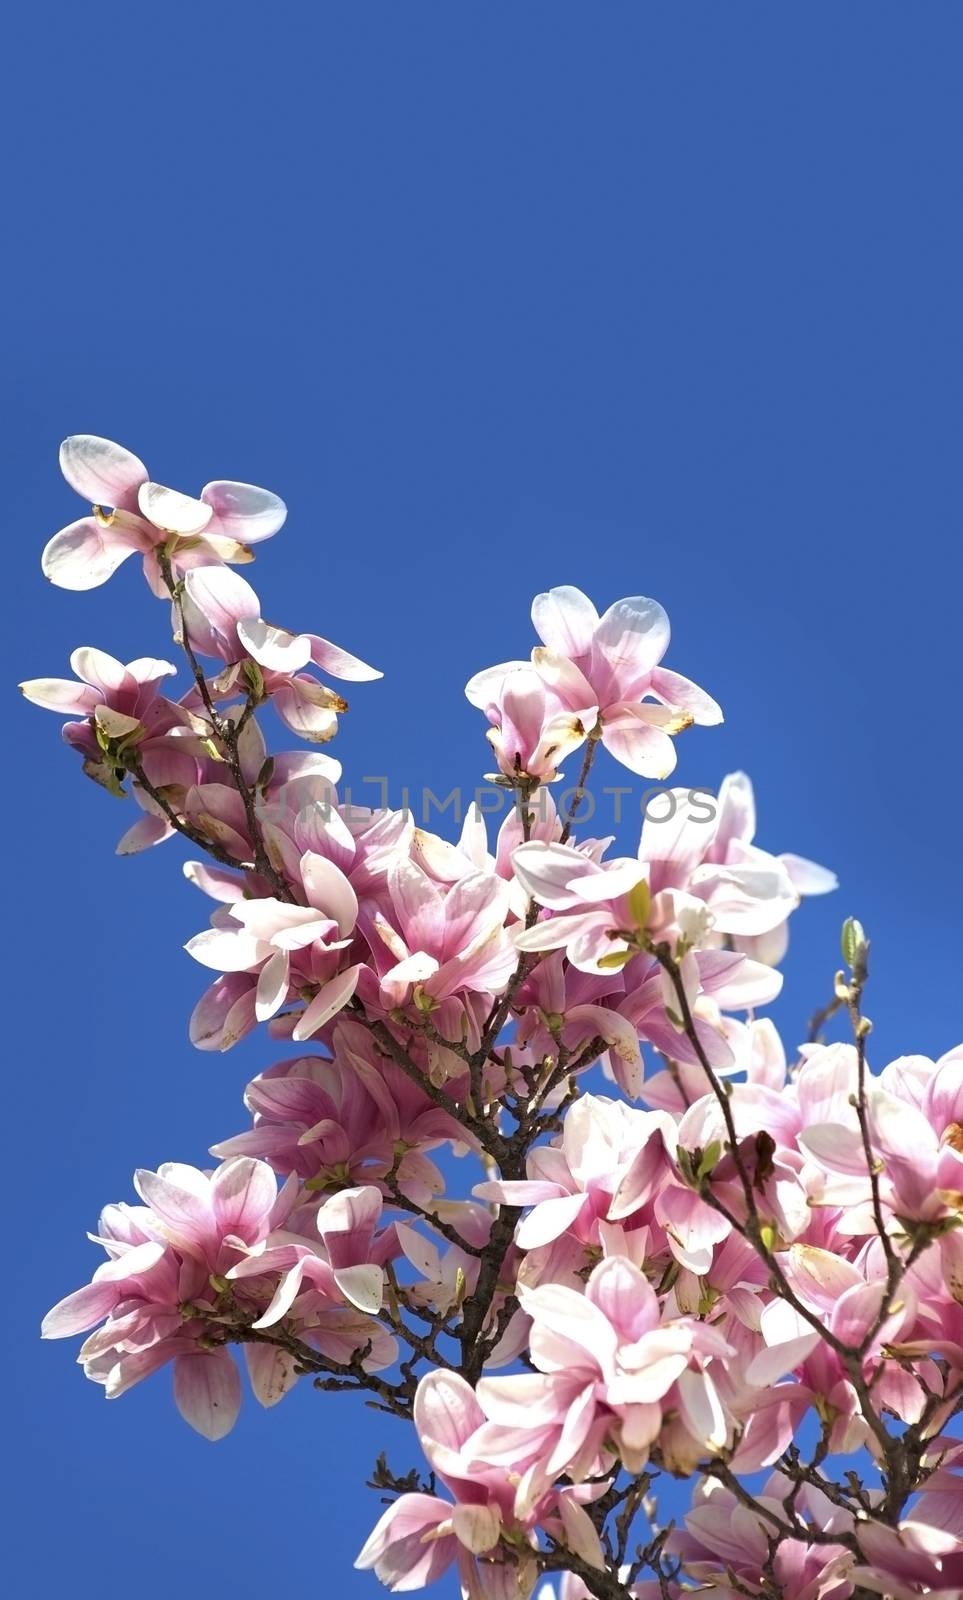 Magnolia Brench by welcomia